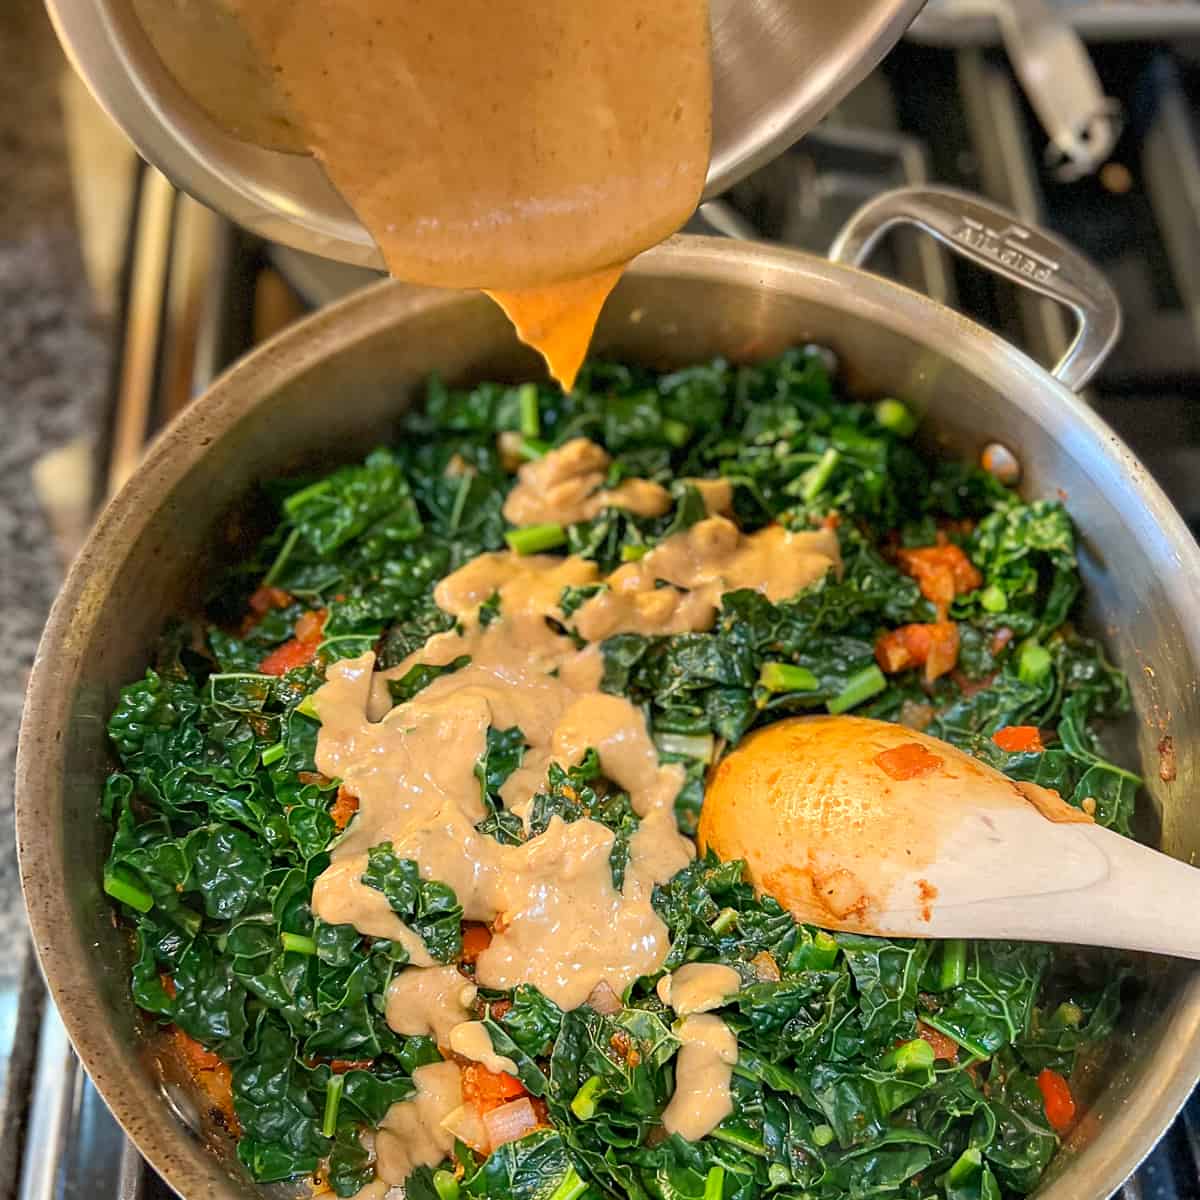 Peanut butter sauce being added to the skillet with cooked greens.